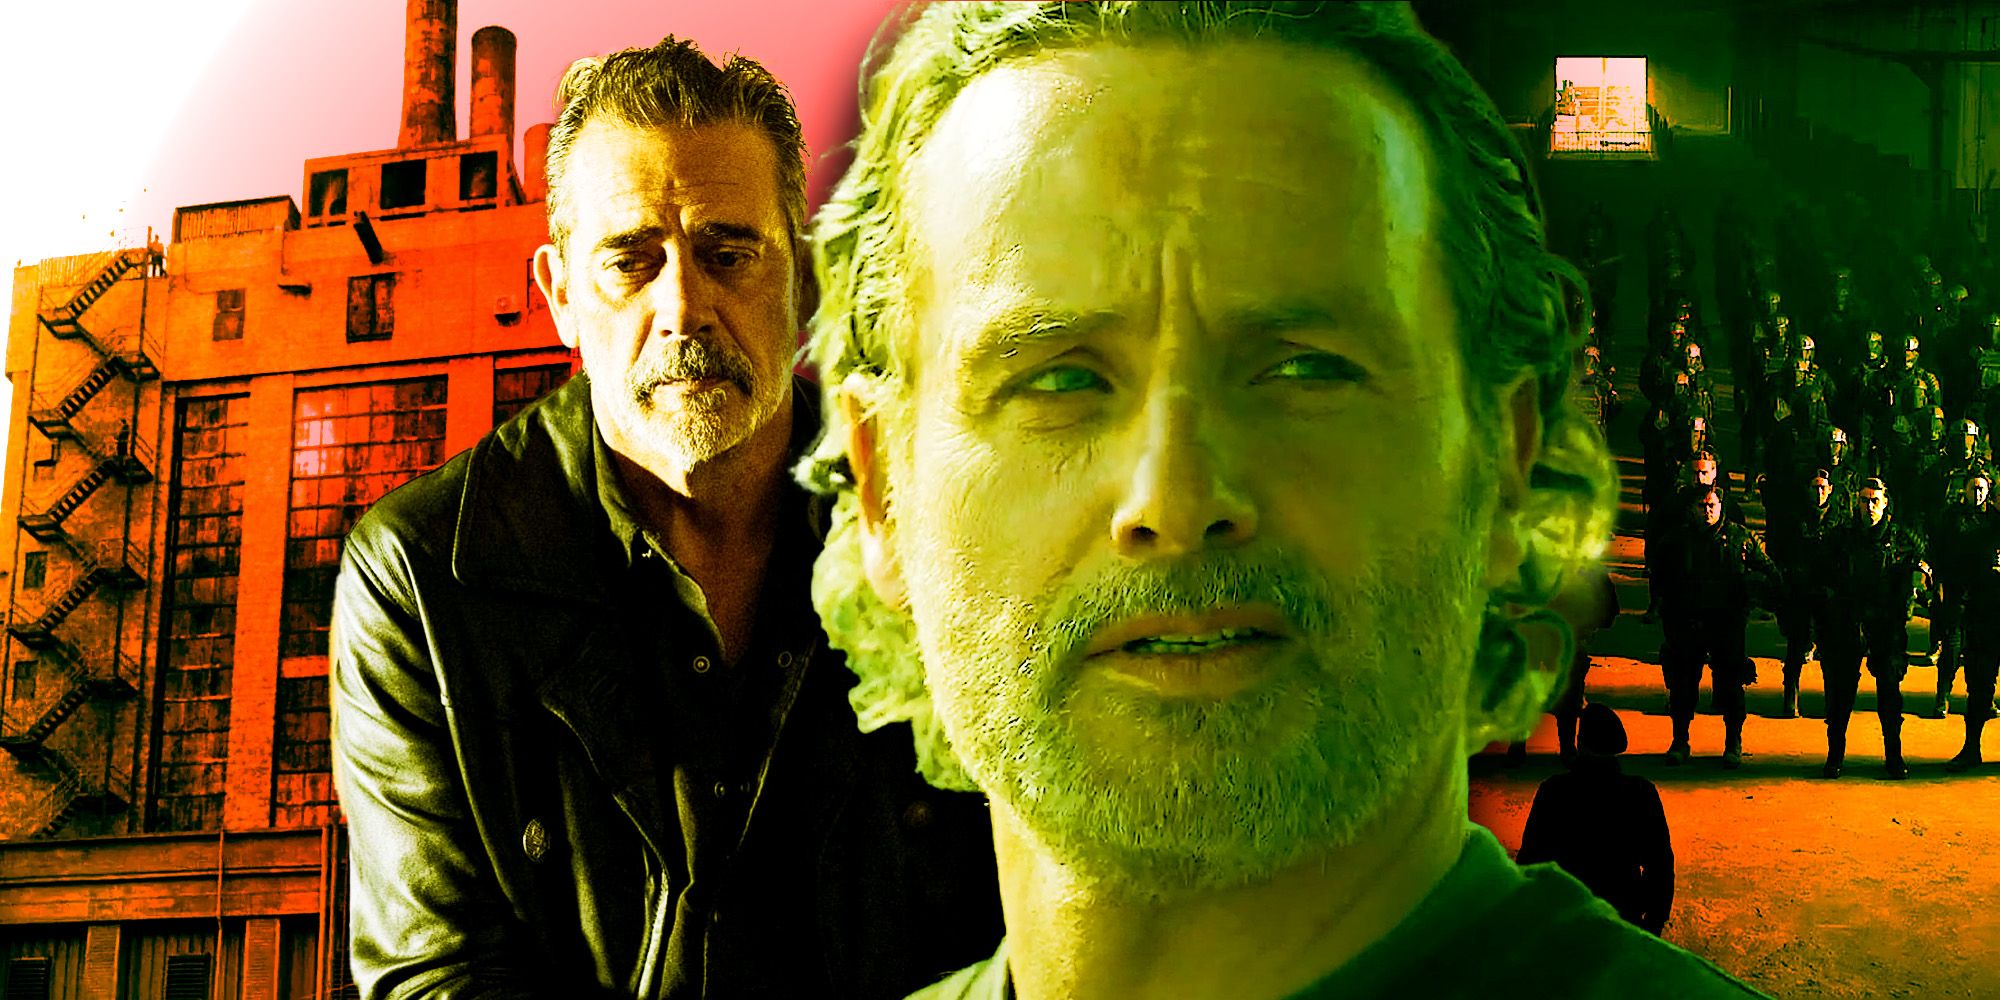 Rick looking menacing from The Ones Who Live and Negan from Dead City with the Sanctuary in the background